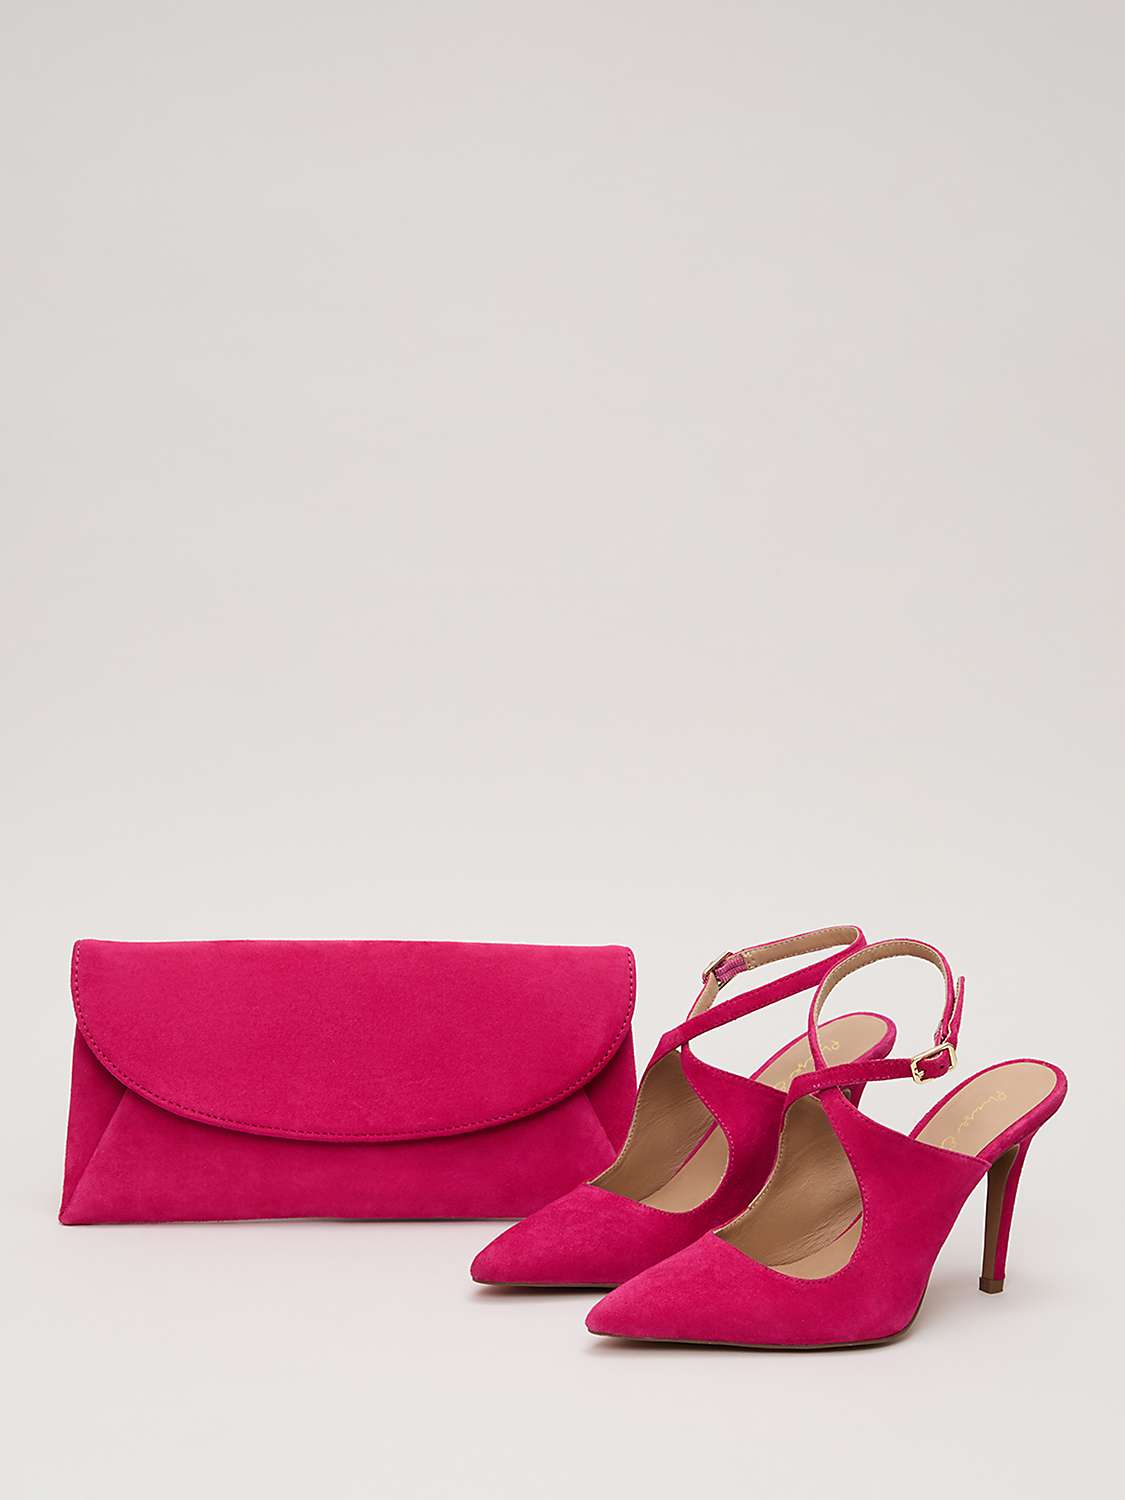 Buy Phase Eight Cross Strap Open Back Suede Shoes, Pink Online at johnlewis.com